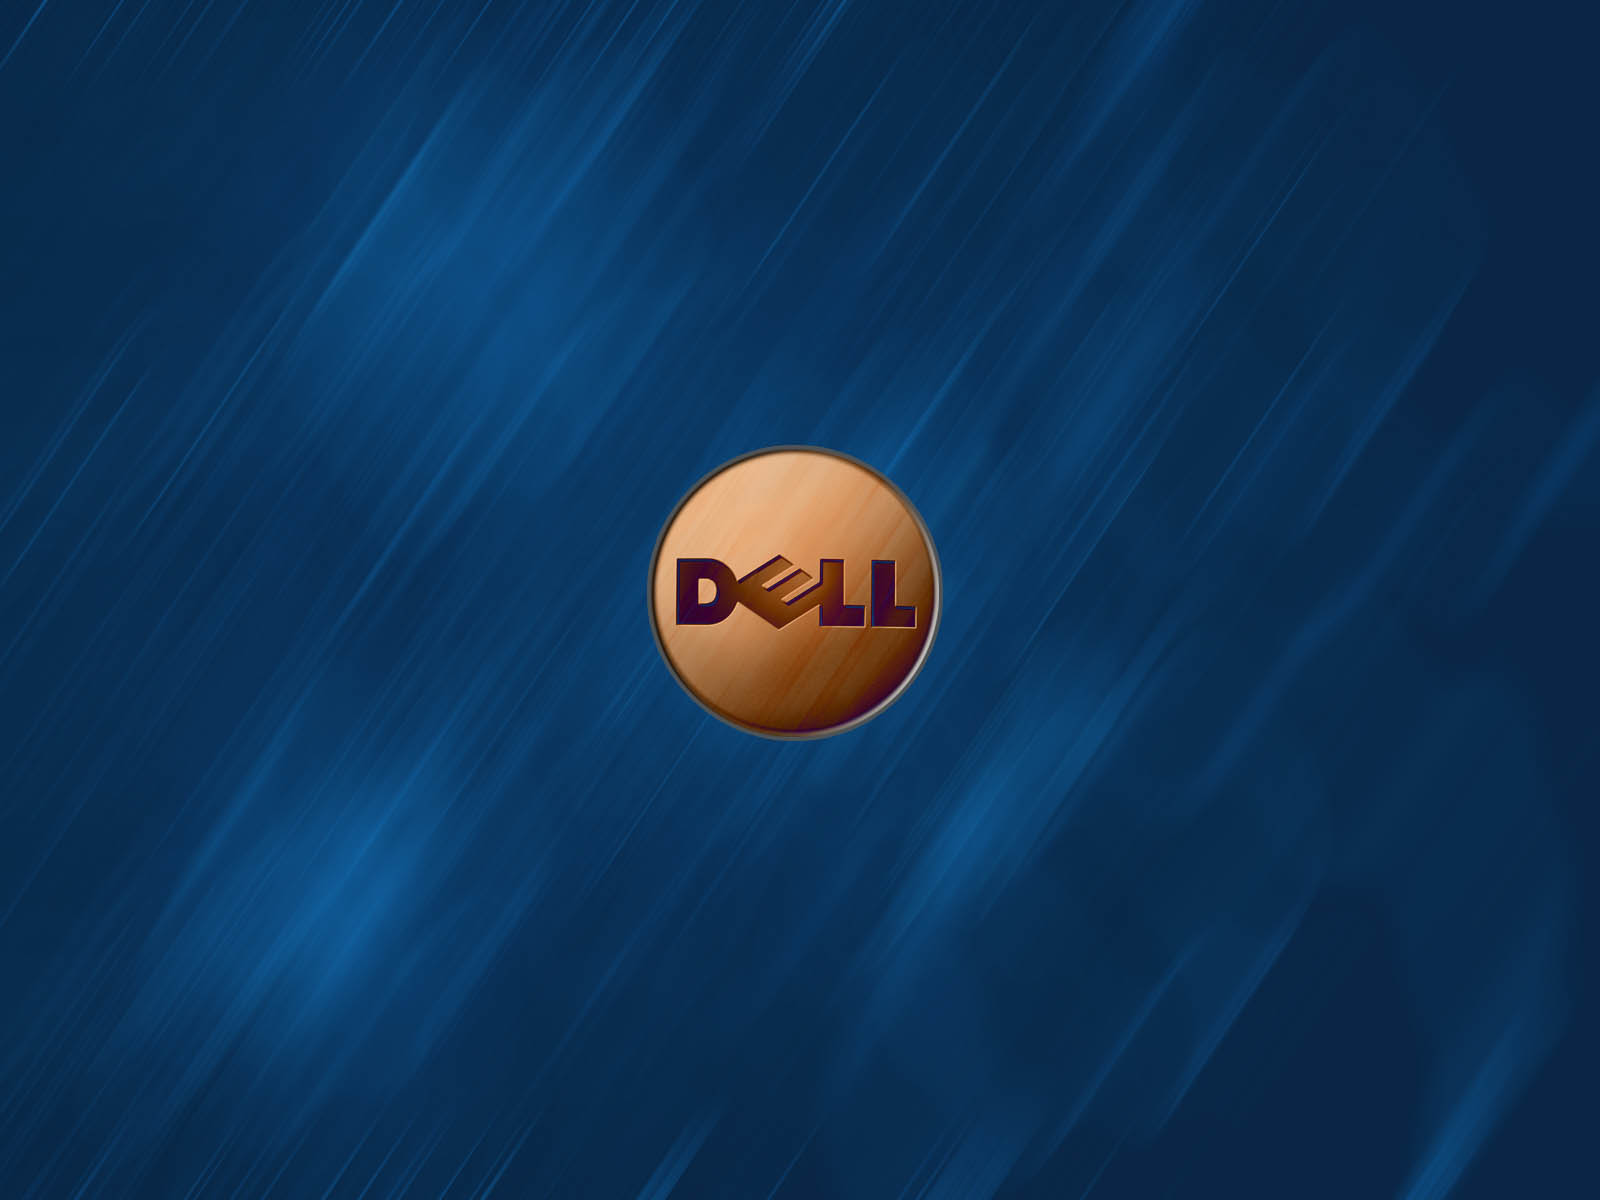 Wallpapers For Laptop Dell download dell laptop wallpaper xpx dell